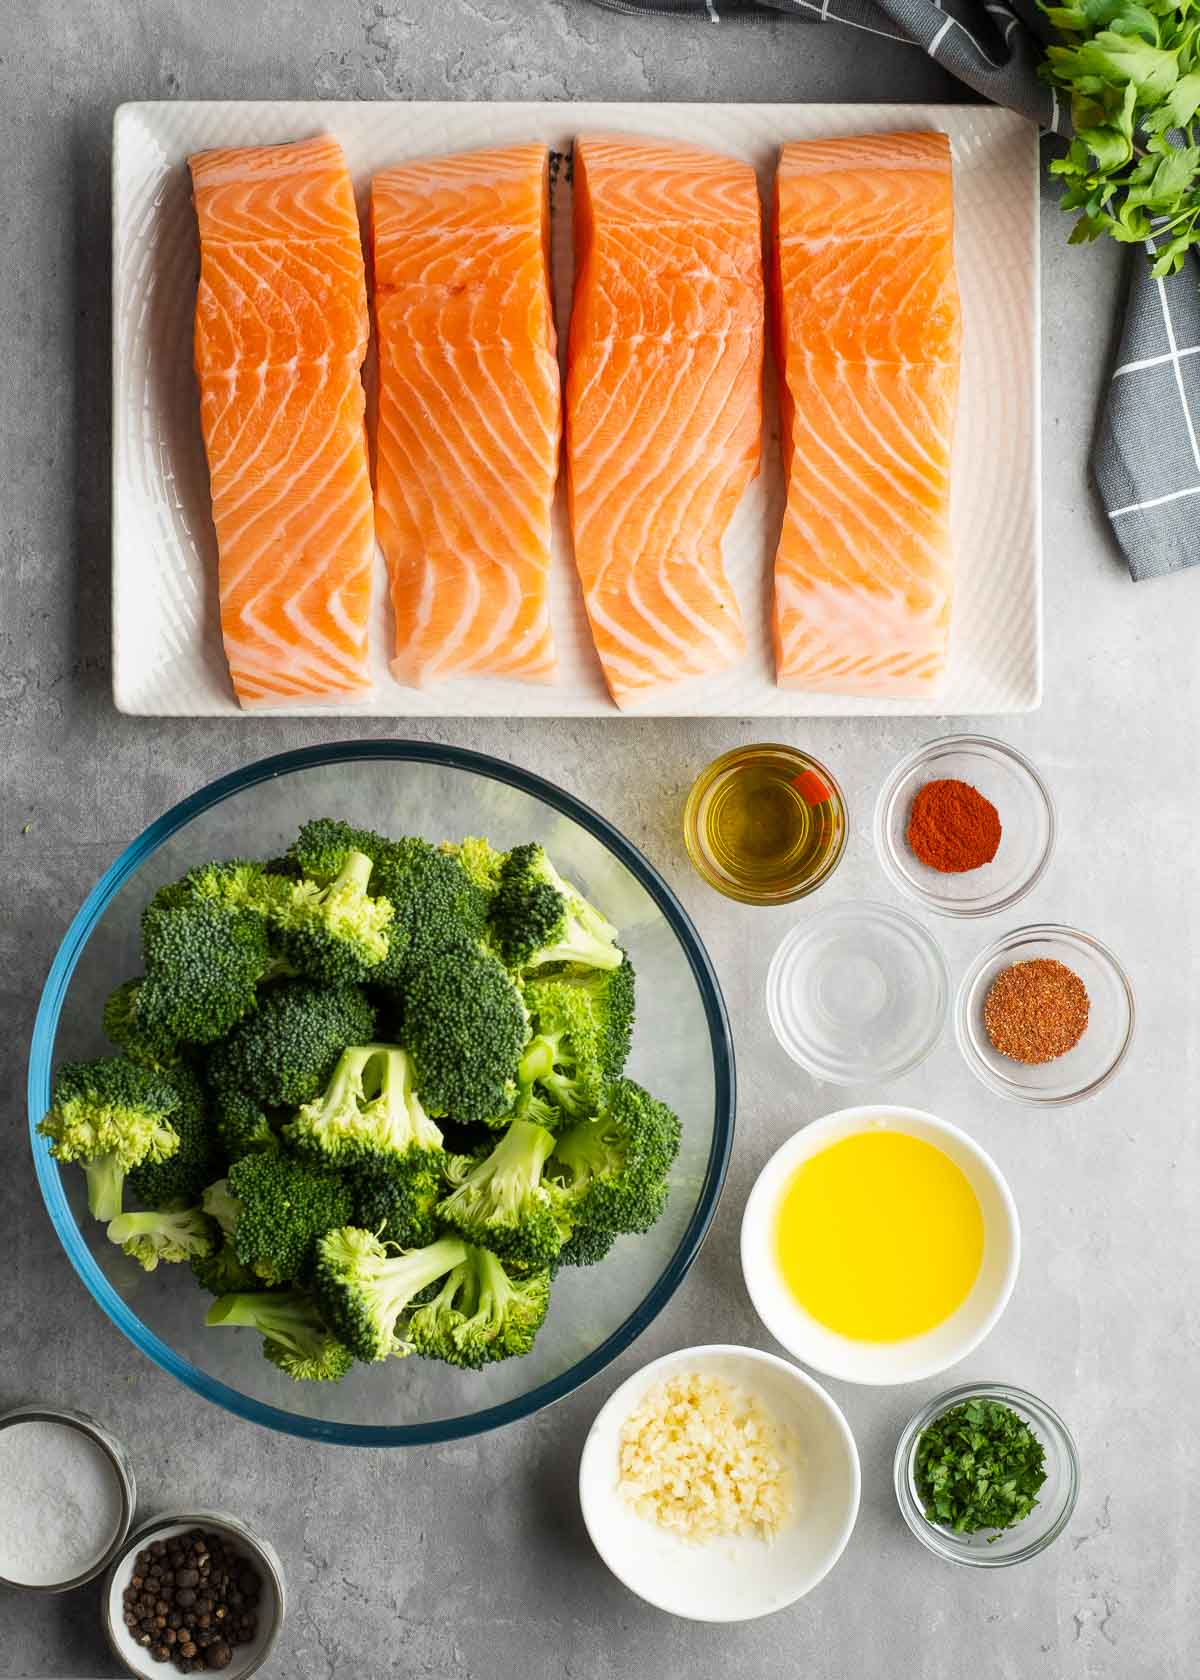 salmon and broccoli ingredients on a white background